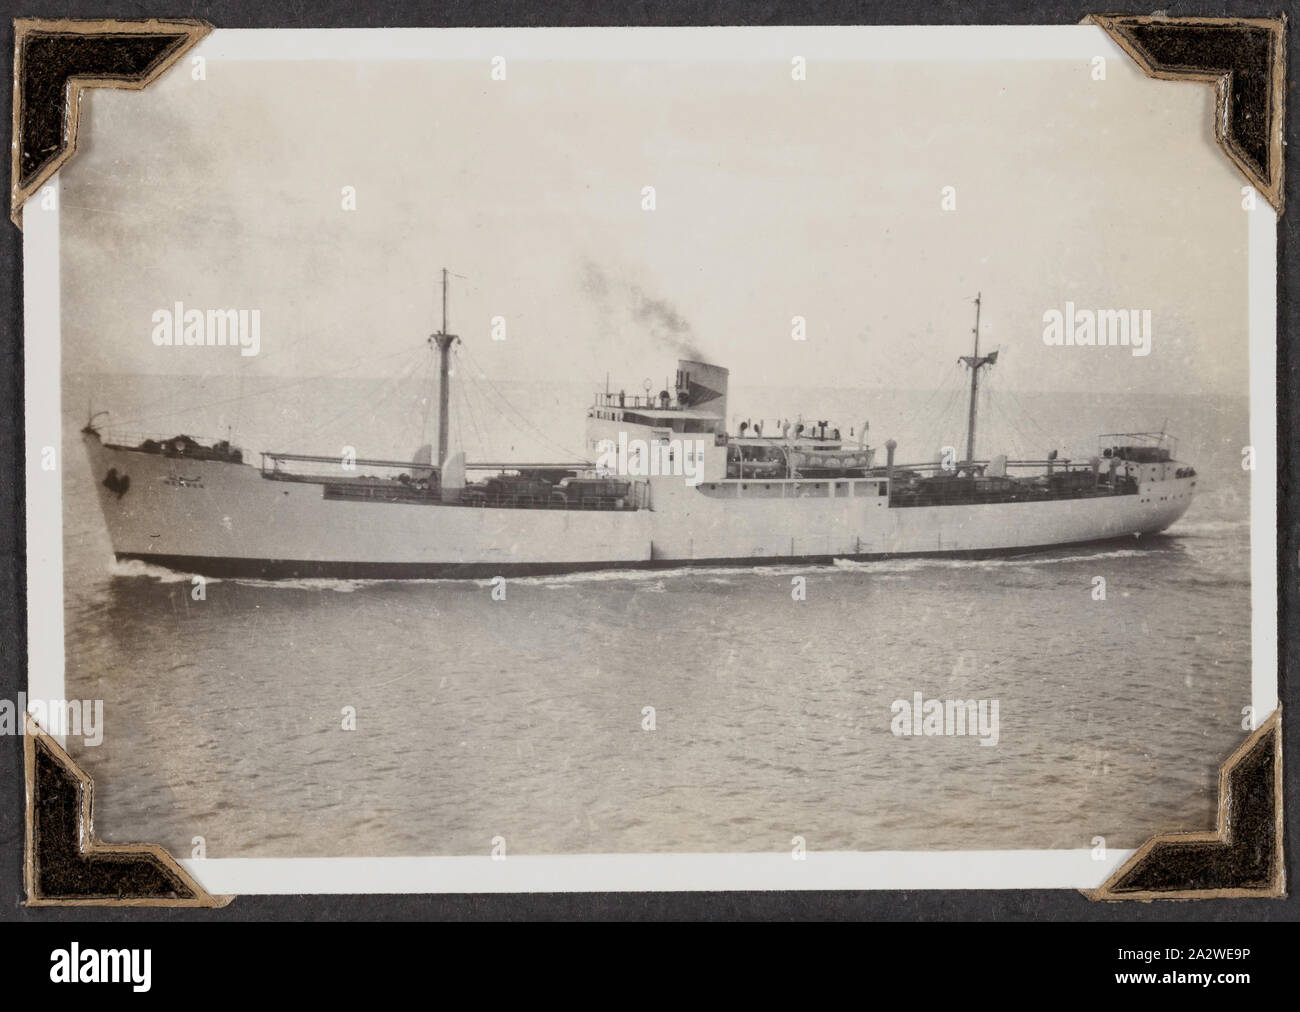 Photograph - Cargo Ship, Palmer Family Migrant Voyage, North African Coast, 02 Mar 1947, Black and white photograph titled 'Cargo Boat', it shows a ship, taken 2 March 1947. It is part of a leather-bound photo album created by George Palmer during his migrant voyage from England to Australia on the RMS Orion in 1947. George migrated to Australia with his wife Gertrude and their two daughters, Shirley and Lesley. the album record the Palmers' life in England, their Stock Photo